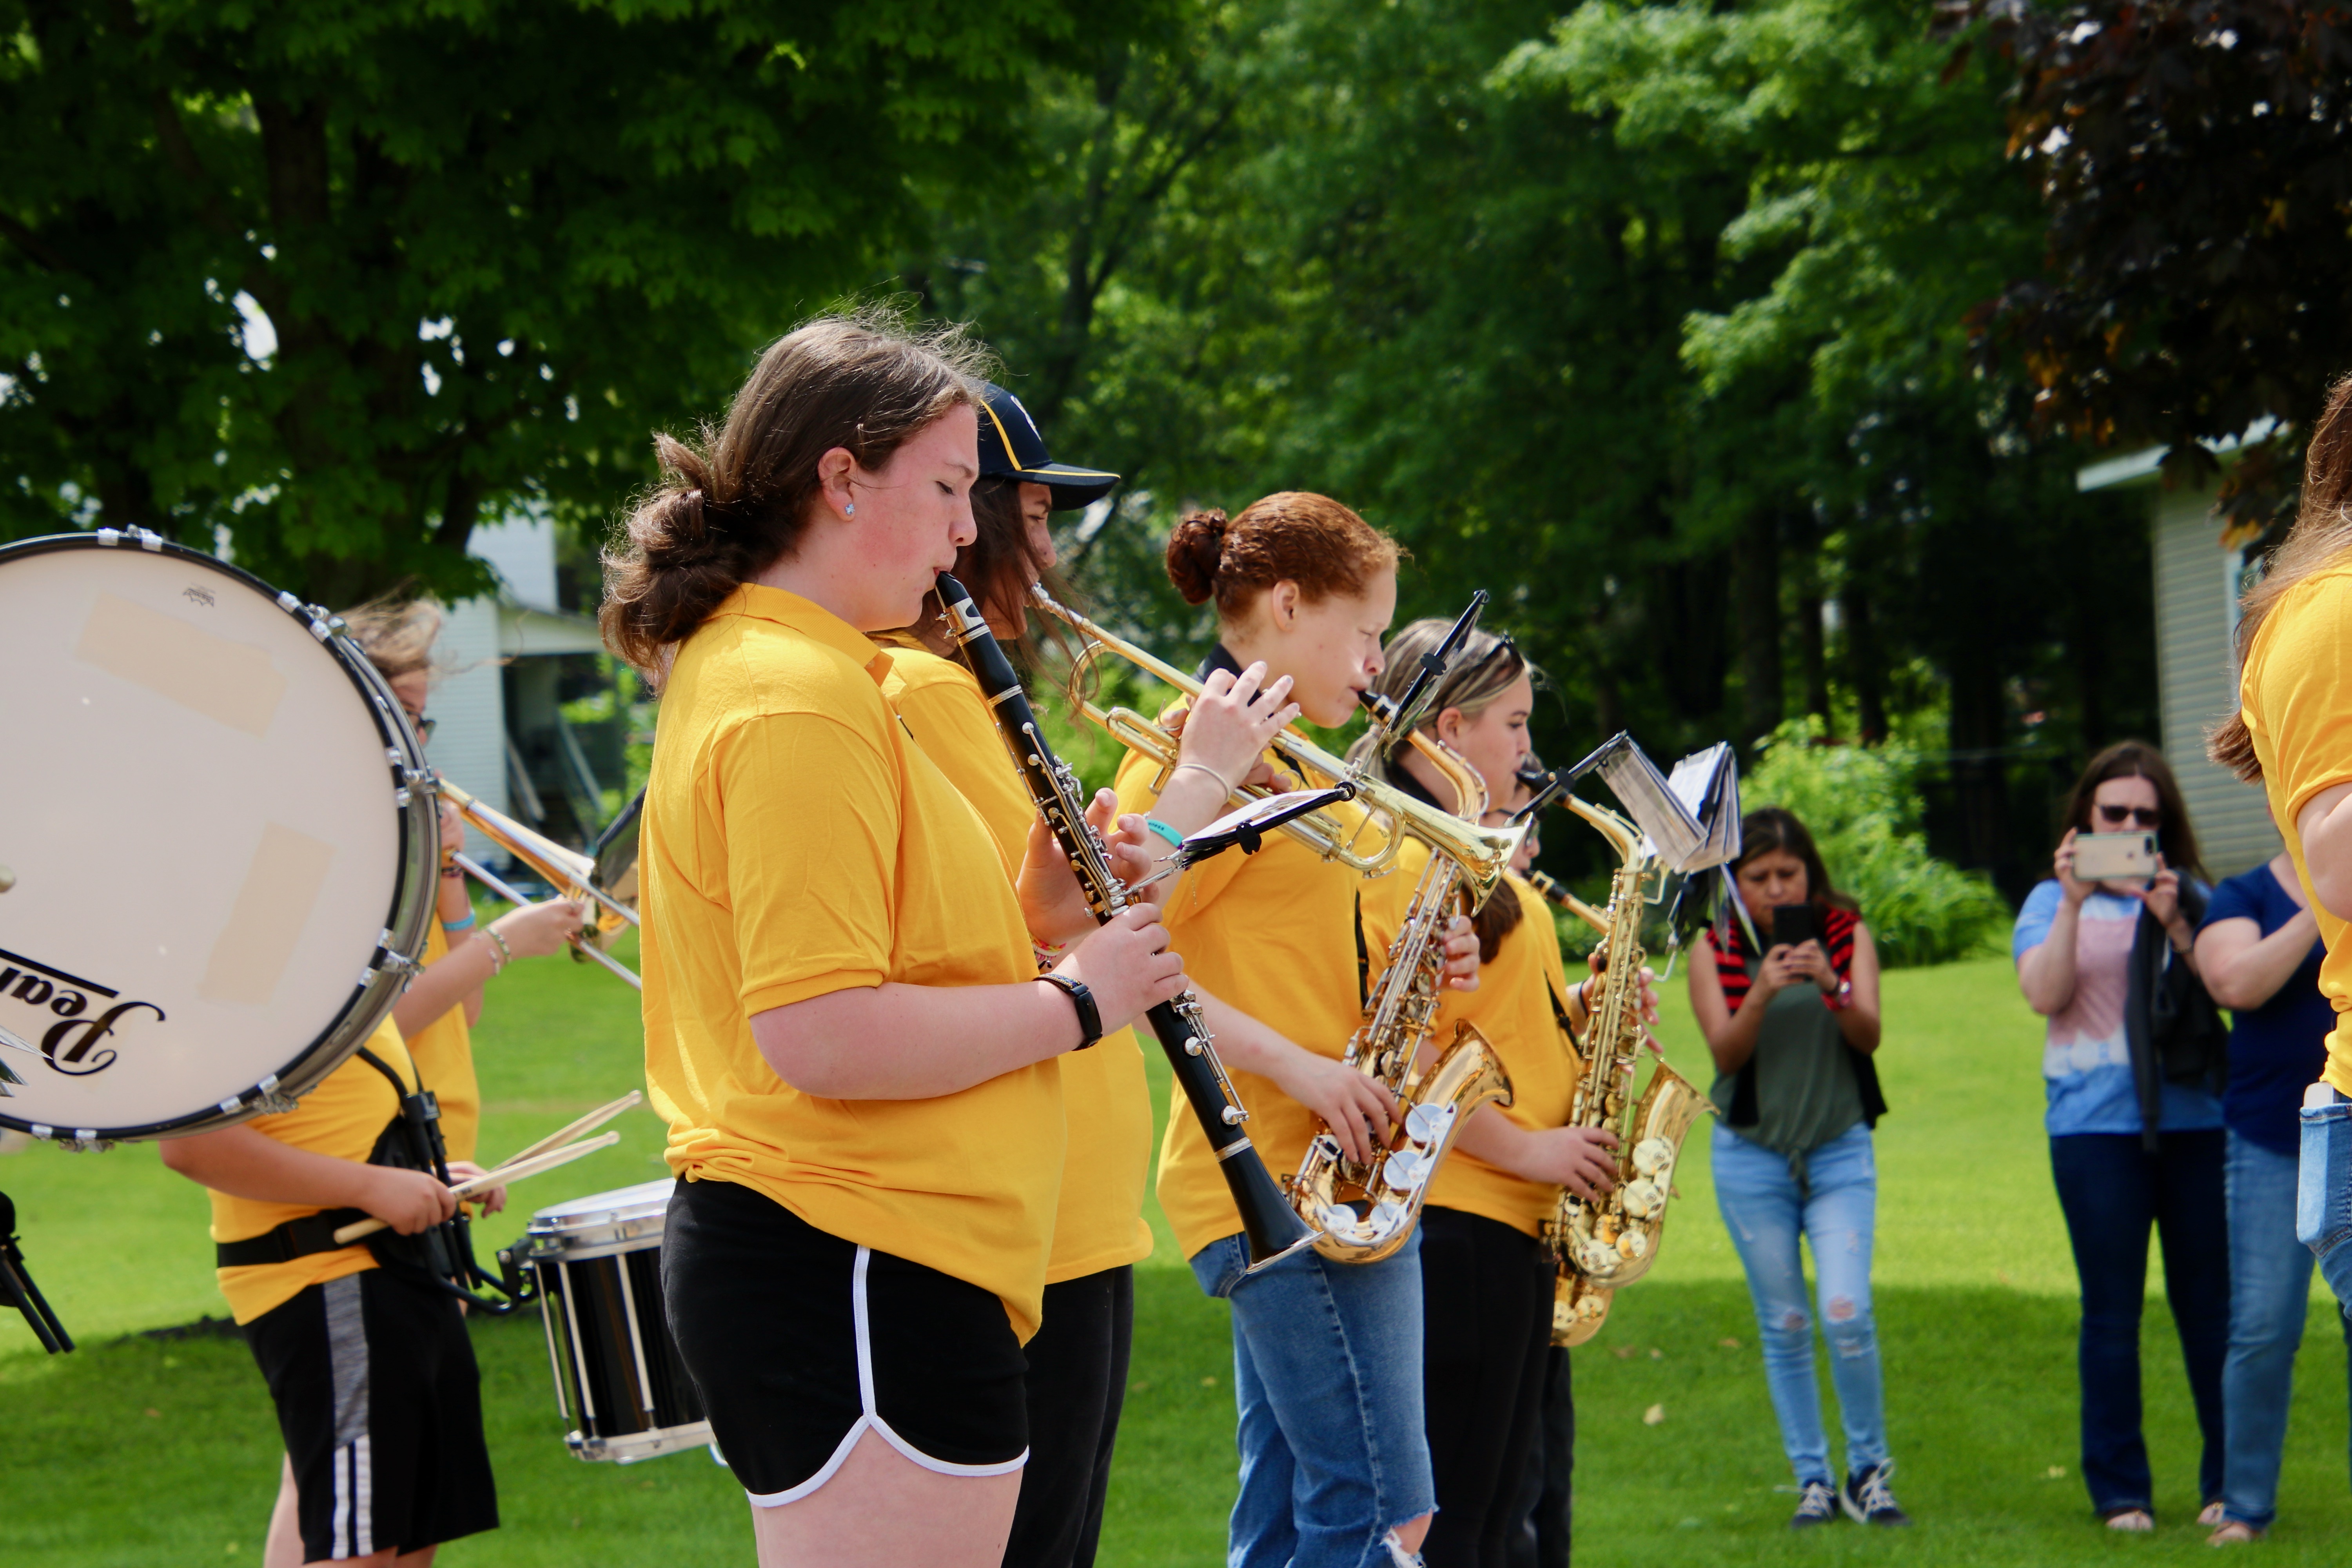 High school marching band musicians in yellow shirts perform outdoors